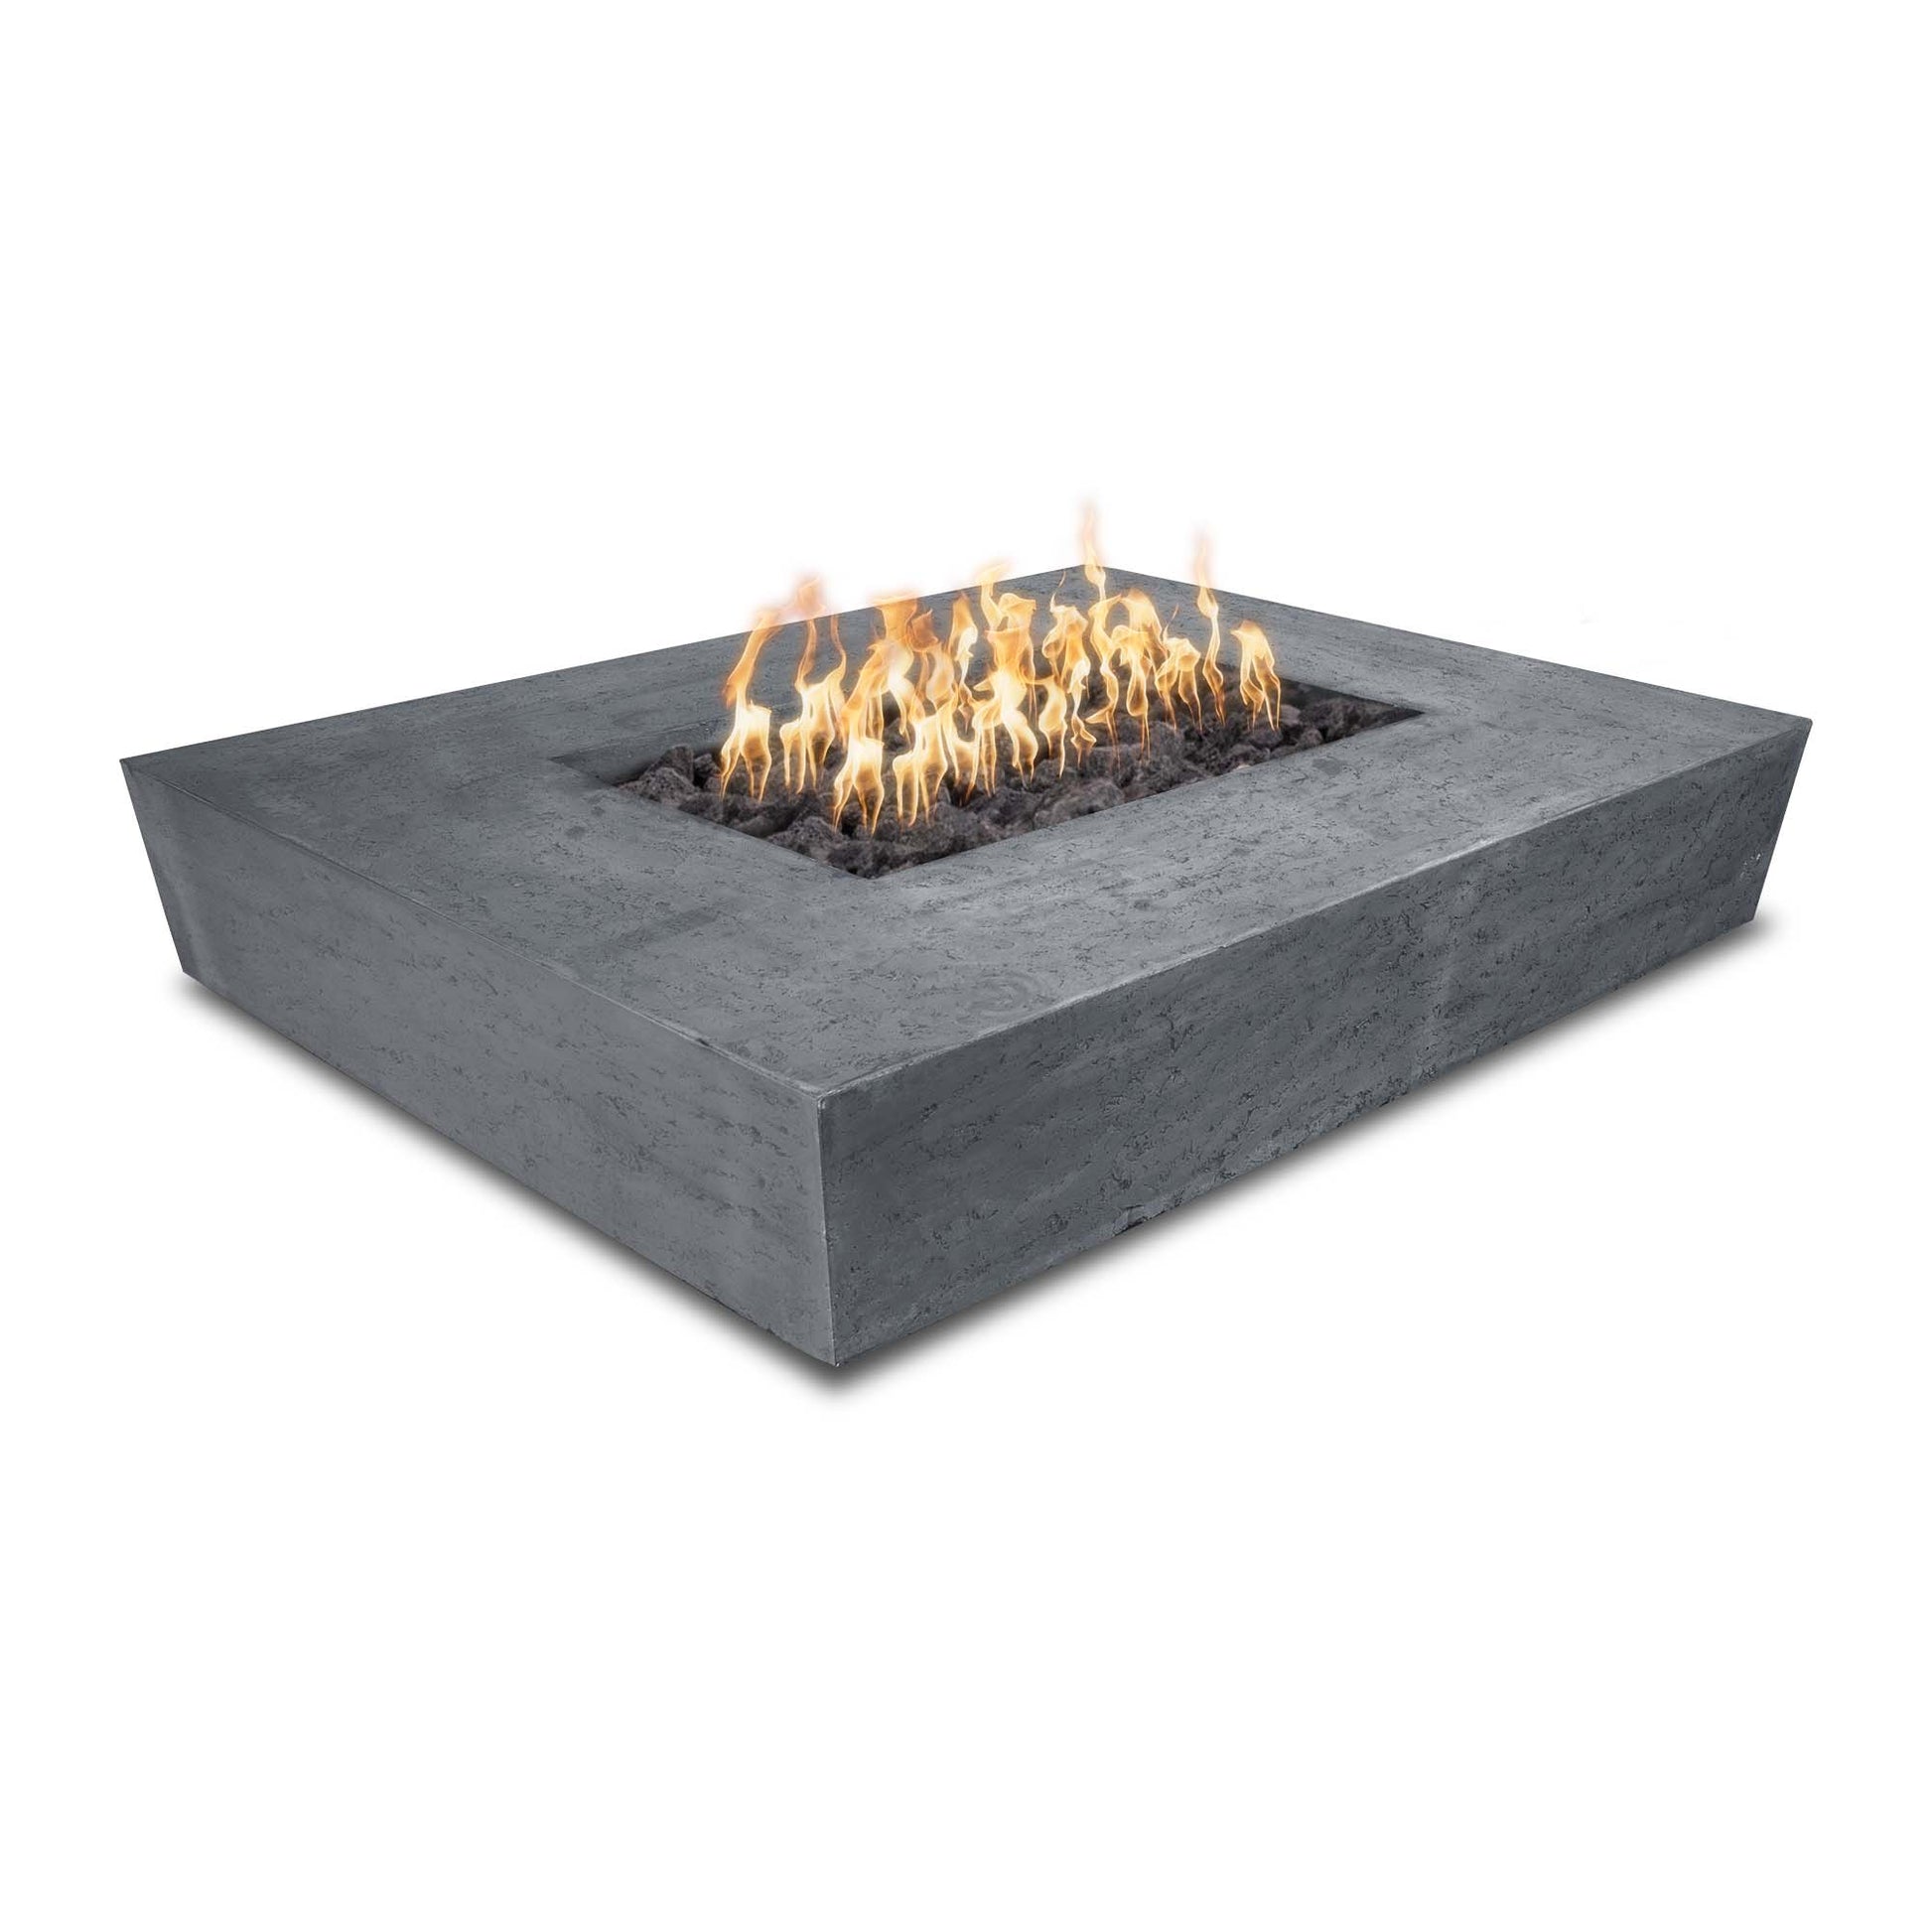 The Outdoor Plus Rectangular Heiko 58" Rustic Coffee GFRC Concrete Liquid Propane Fire Pit with 110V Electronic Ignition